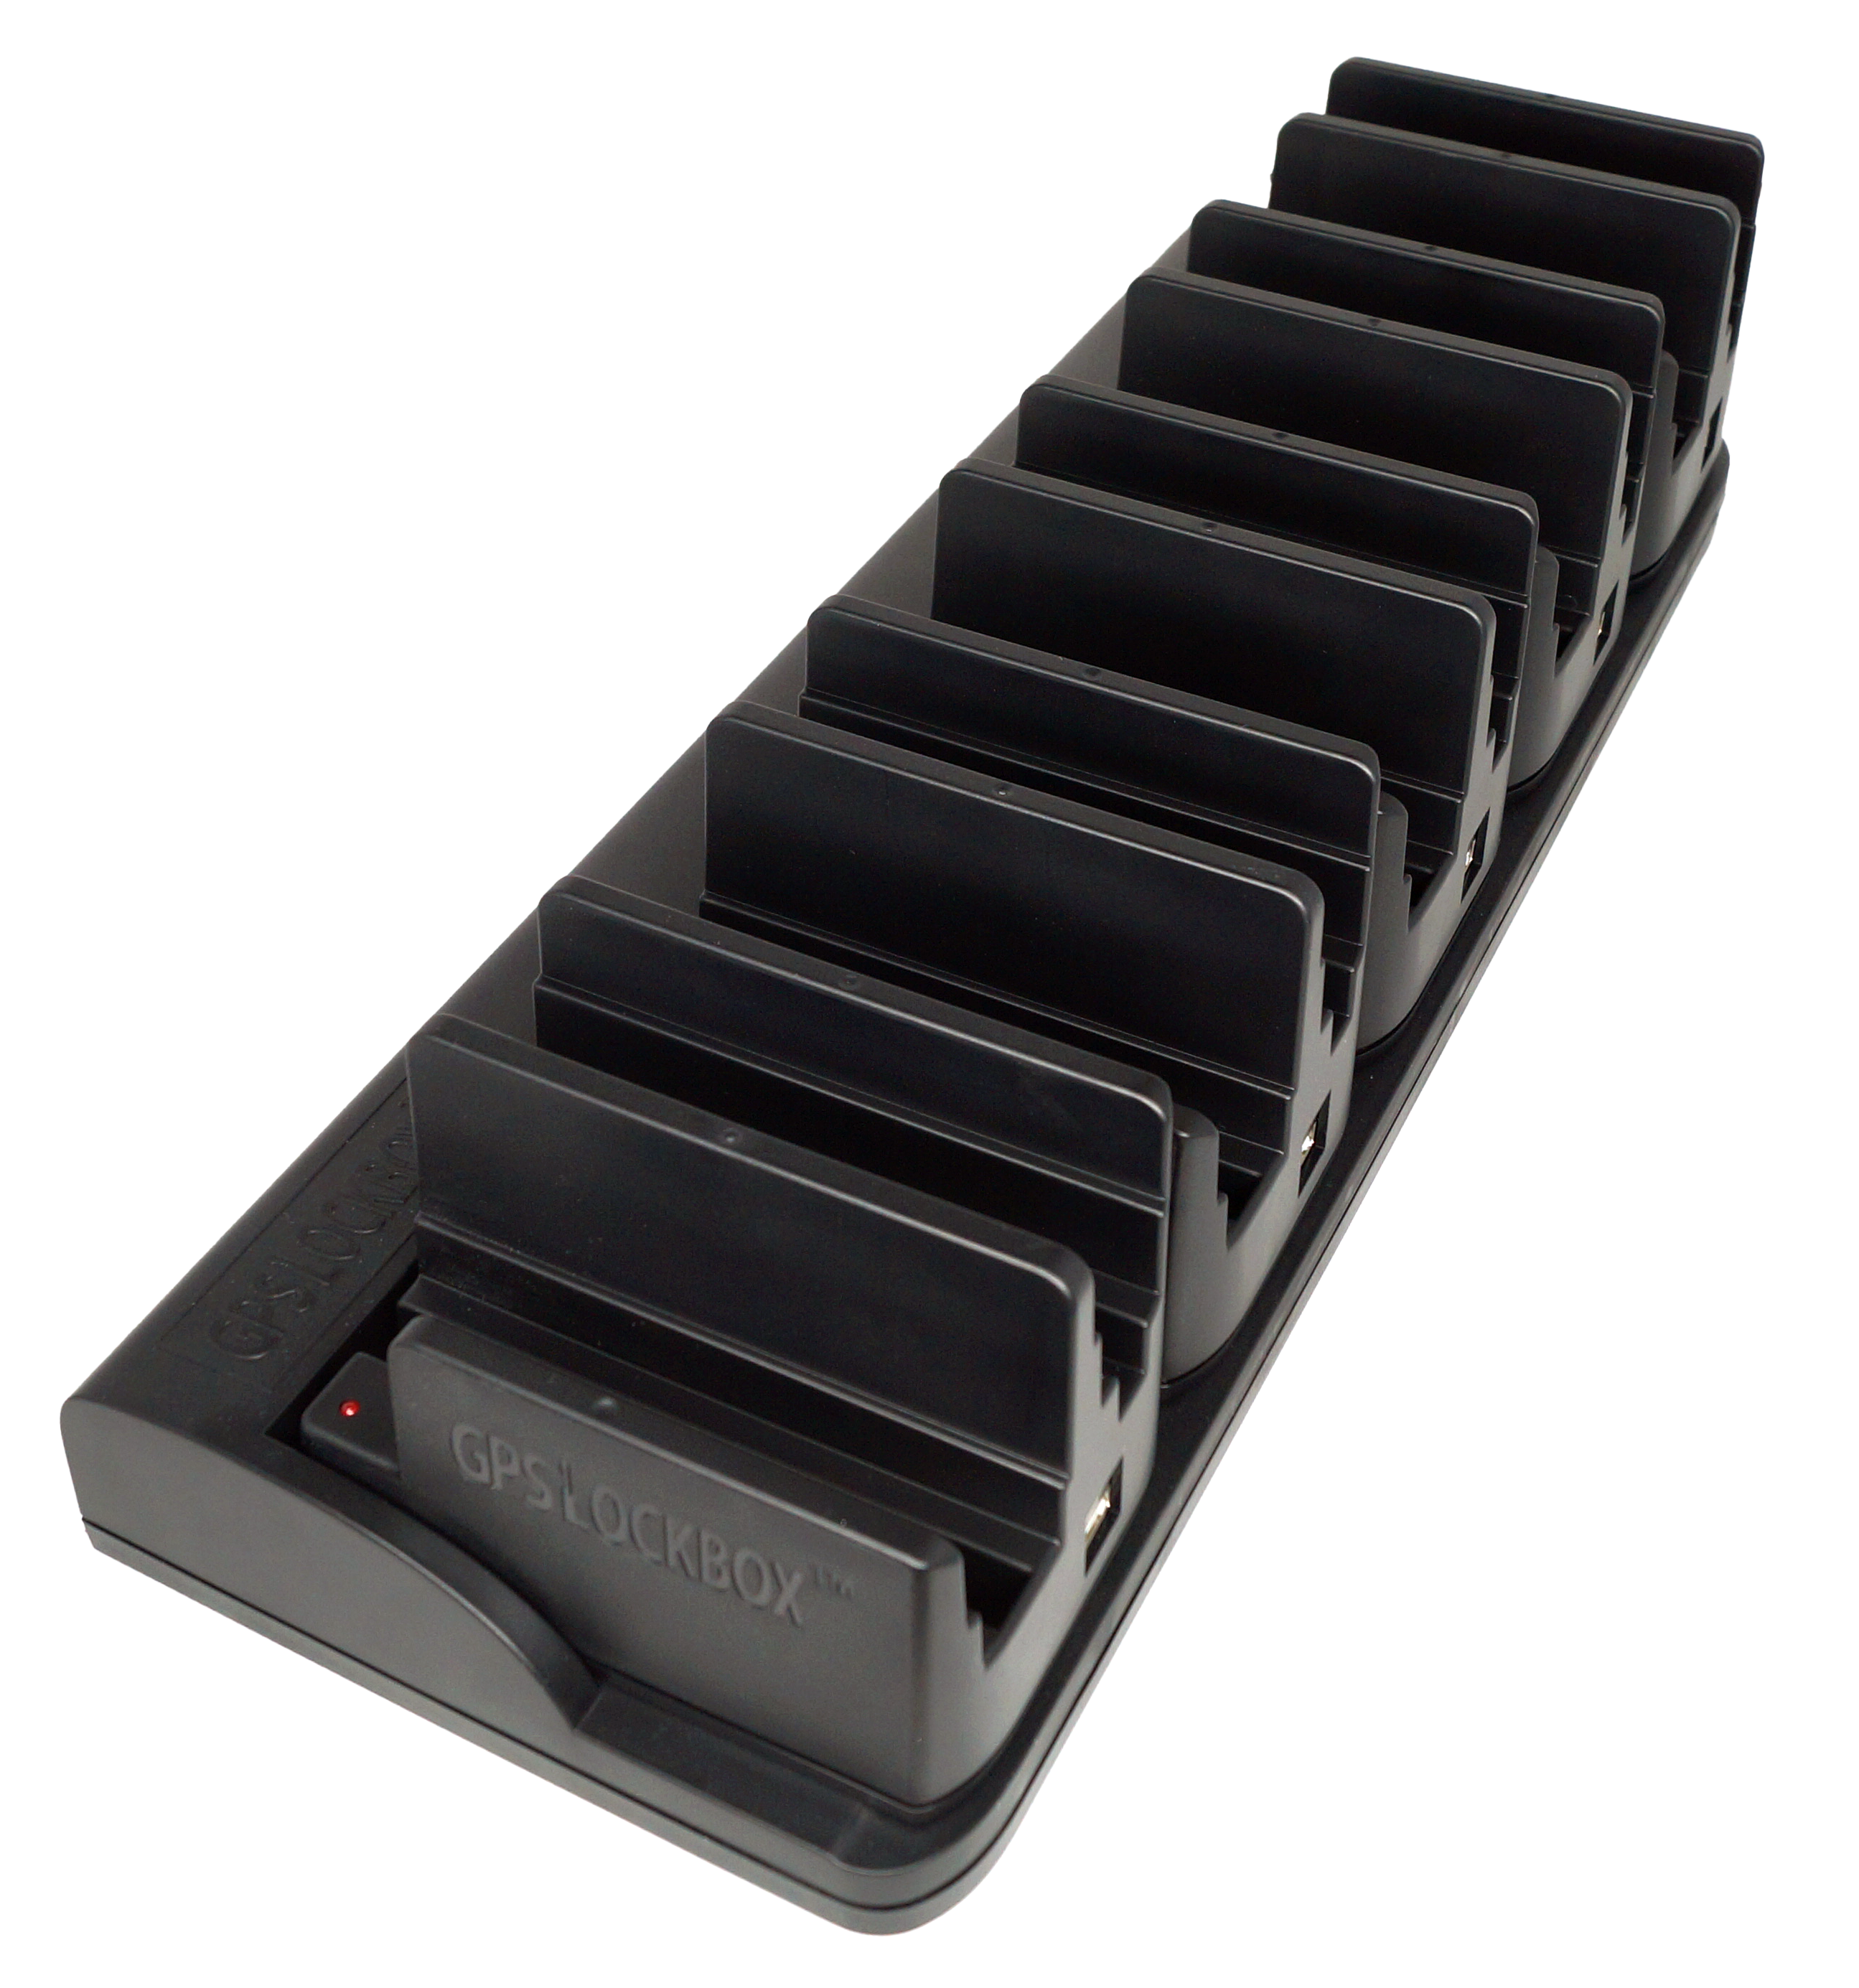 GPSLockbox is proud to introduce our new 10-Bay Universal Device Charging Dock